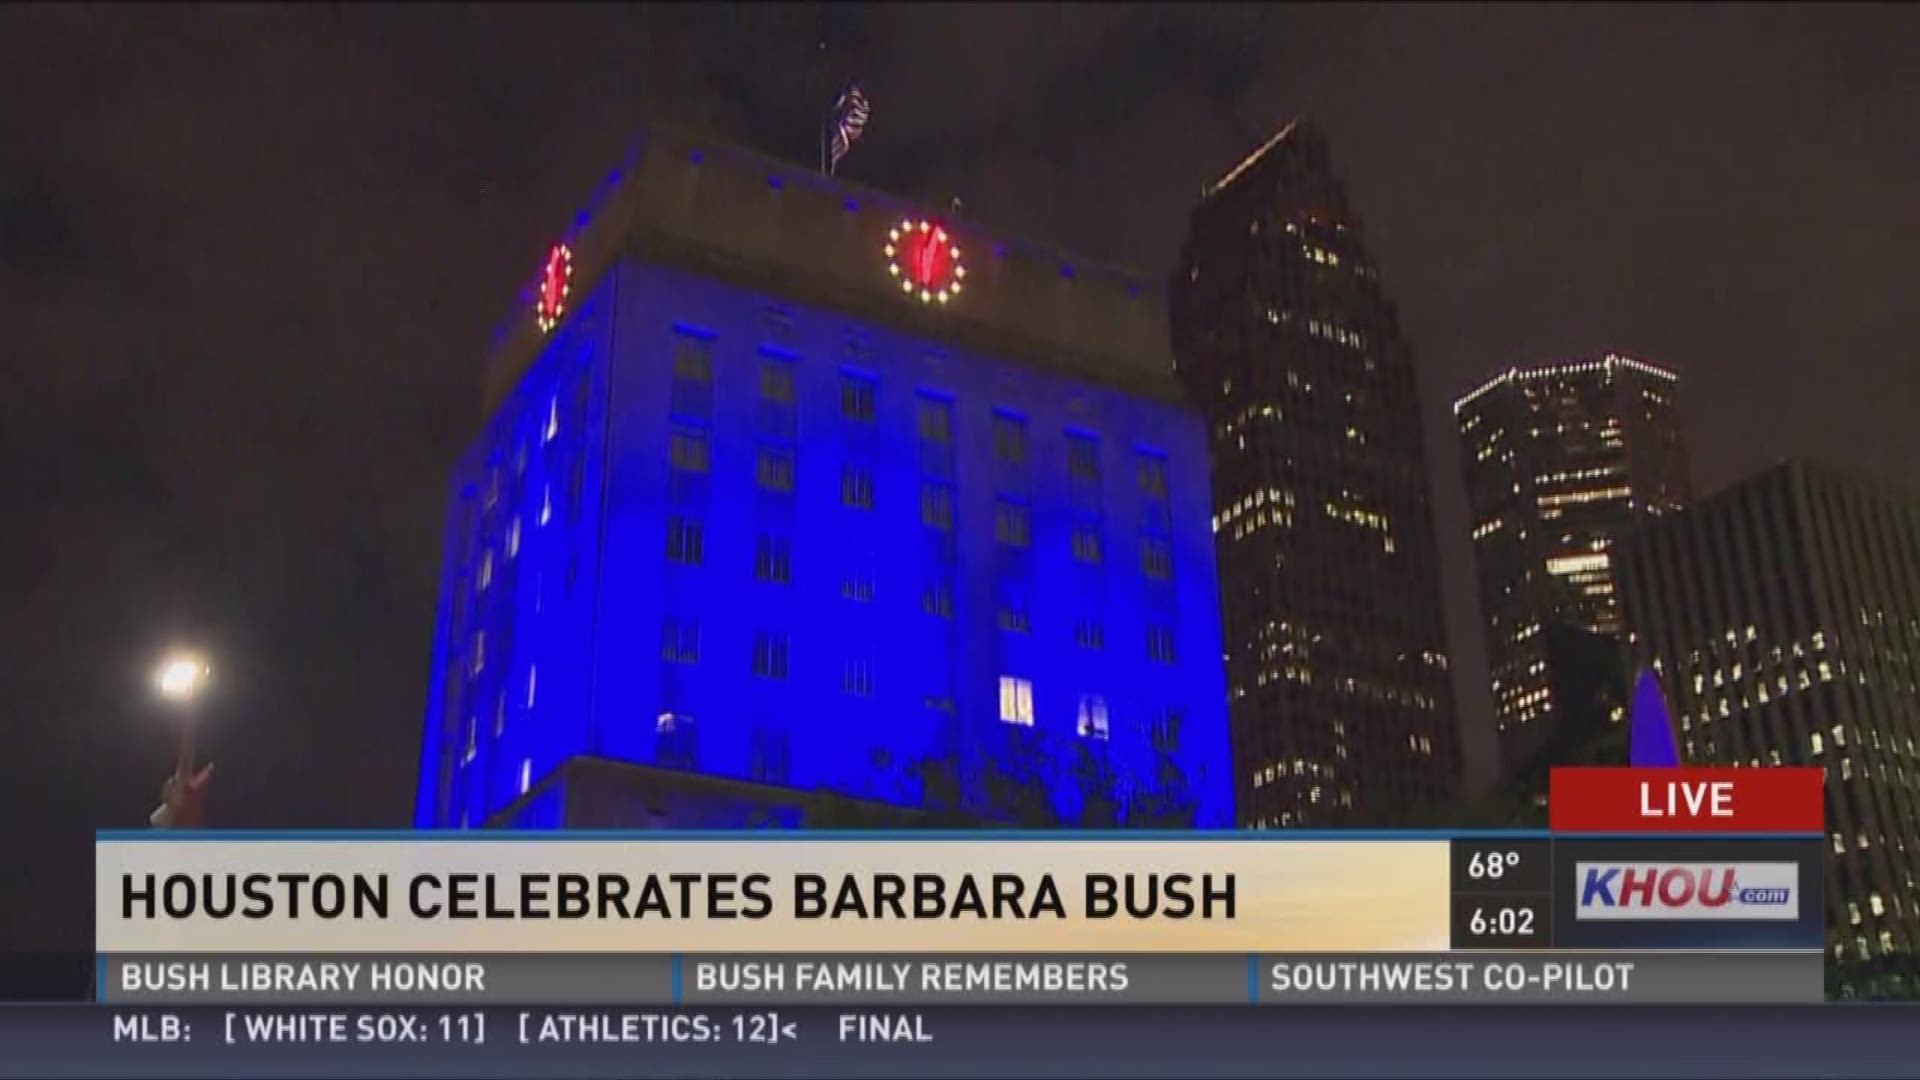 Houston's City Hall was illuminated in blue overnight in honor of former First Lady Barbara Bush.